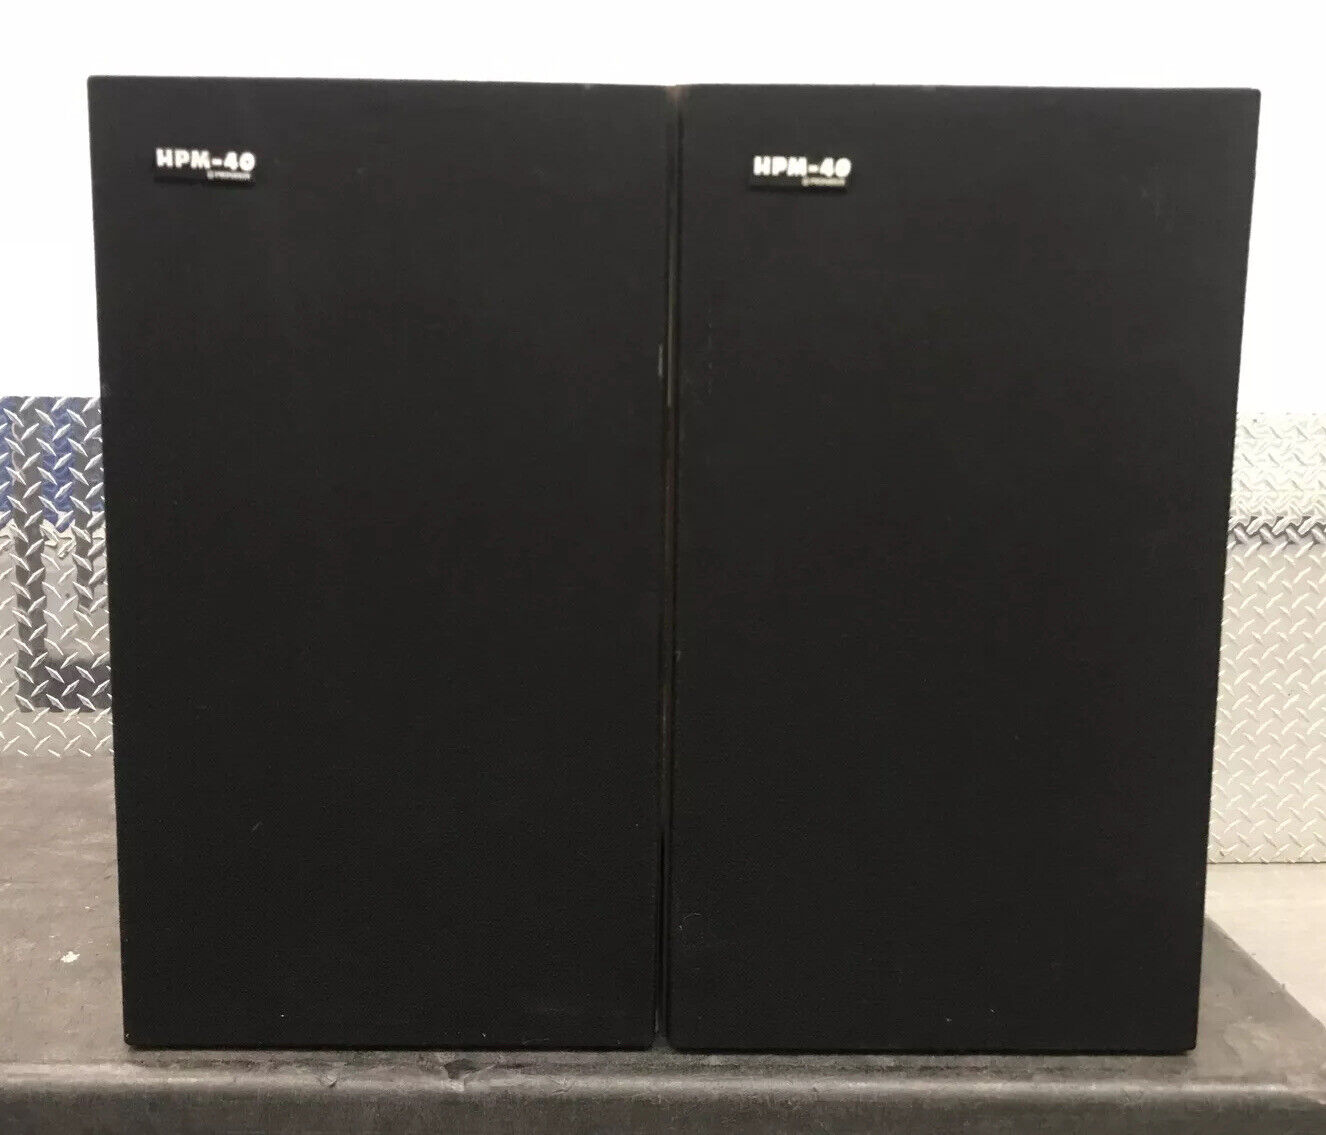 Pioneer HPM-40 HPM40 Speakers With High Range Level Sequence Serial Numbers Rare